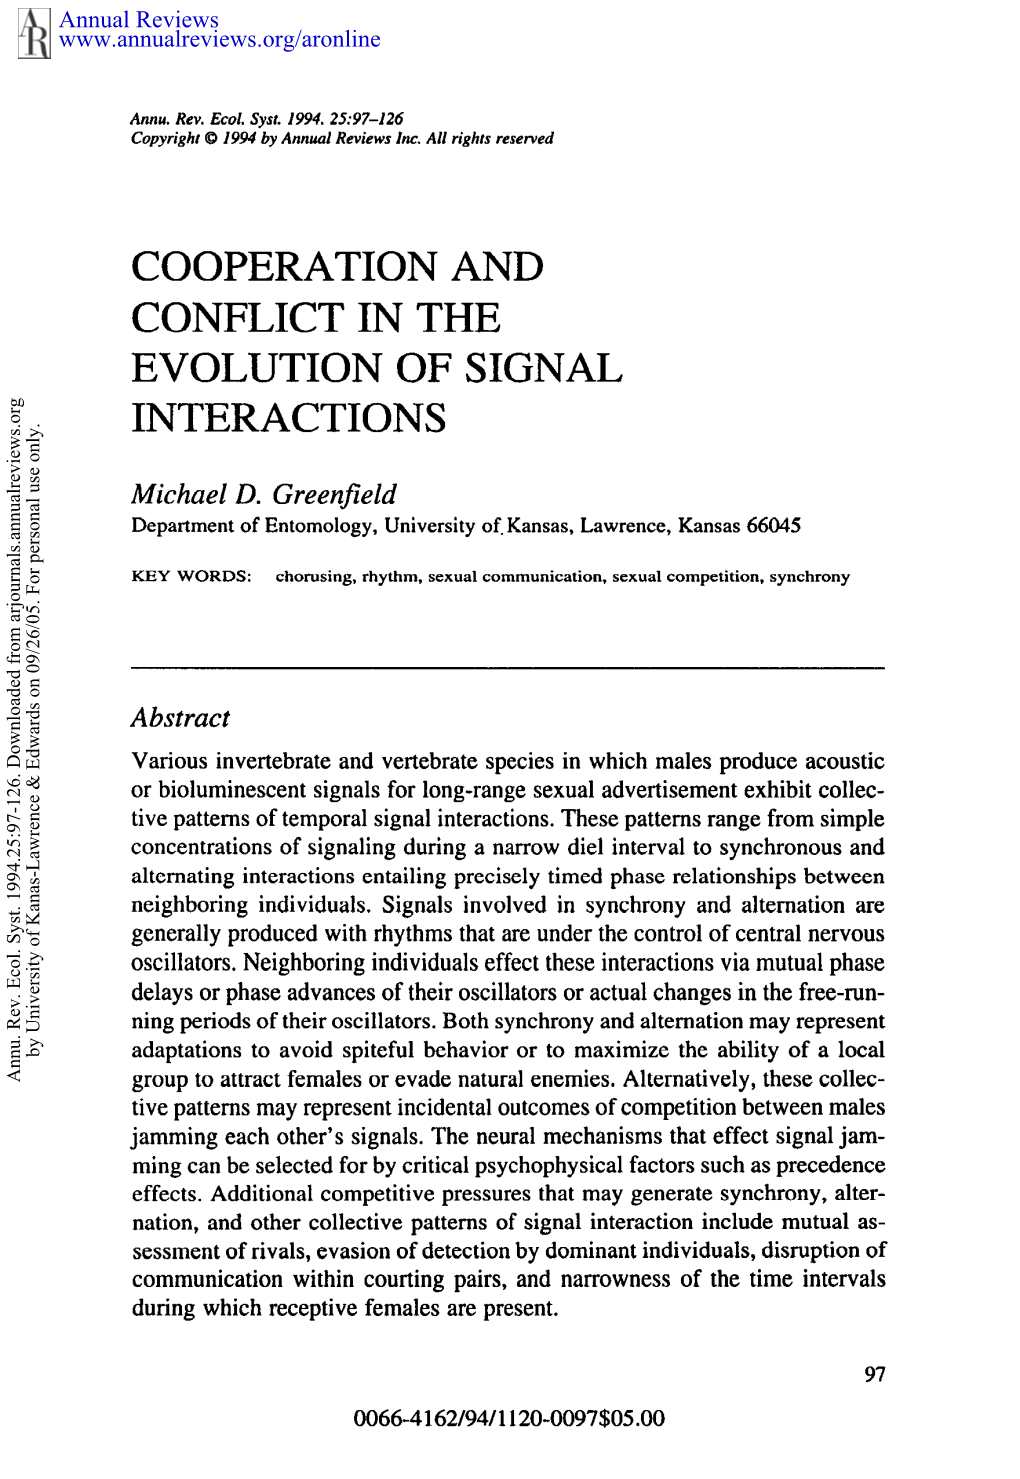 Cooperation and Conflict in the Evolution of Signal Interactions